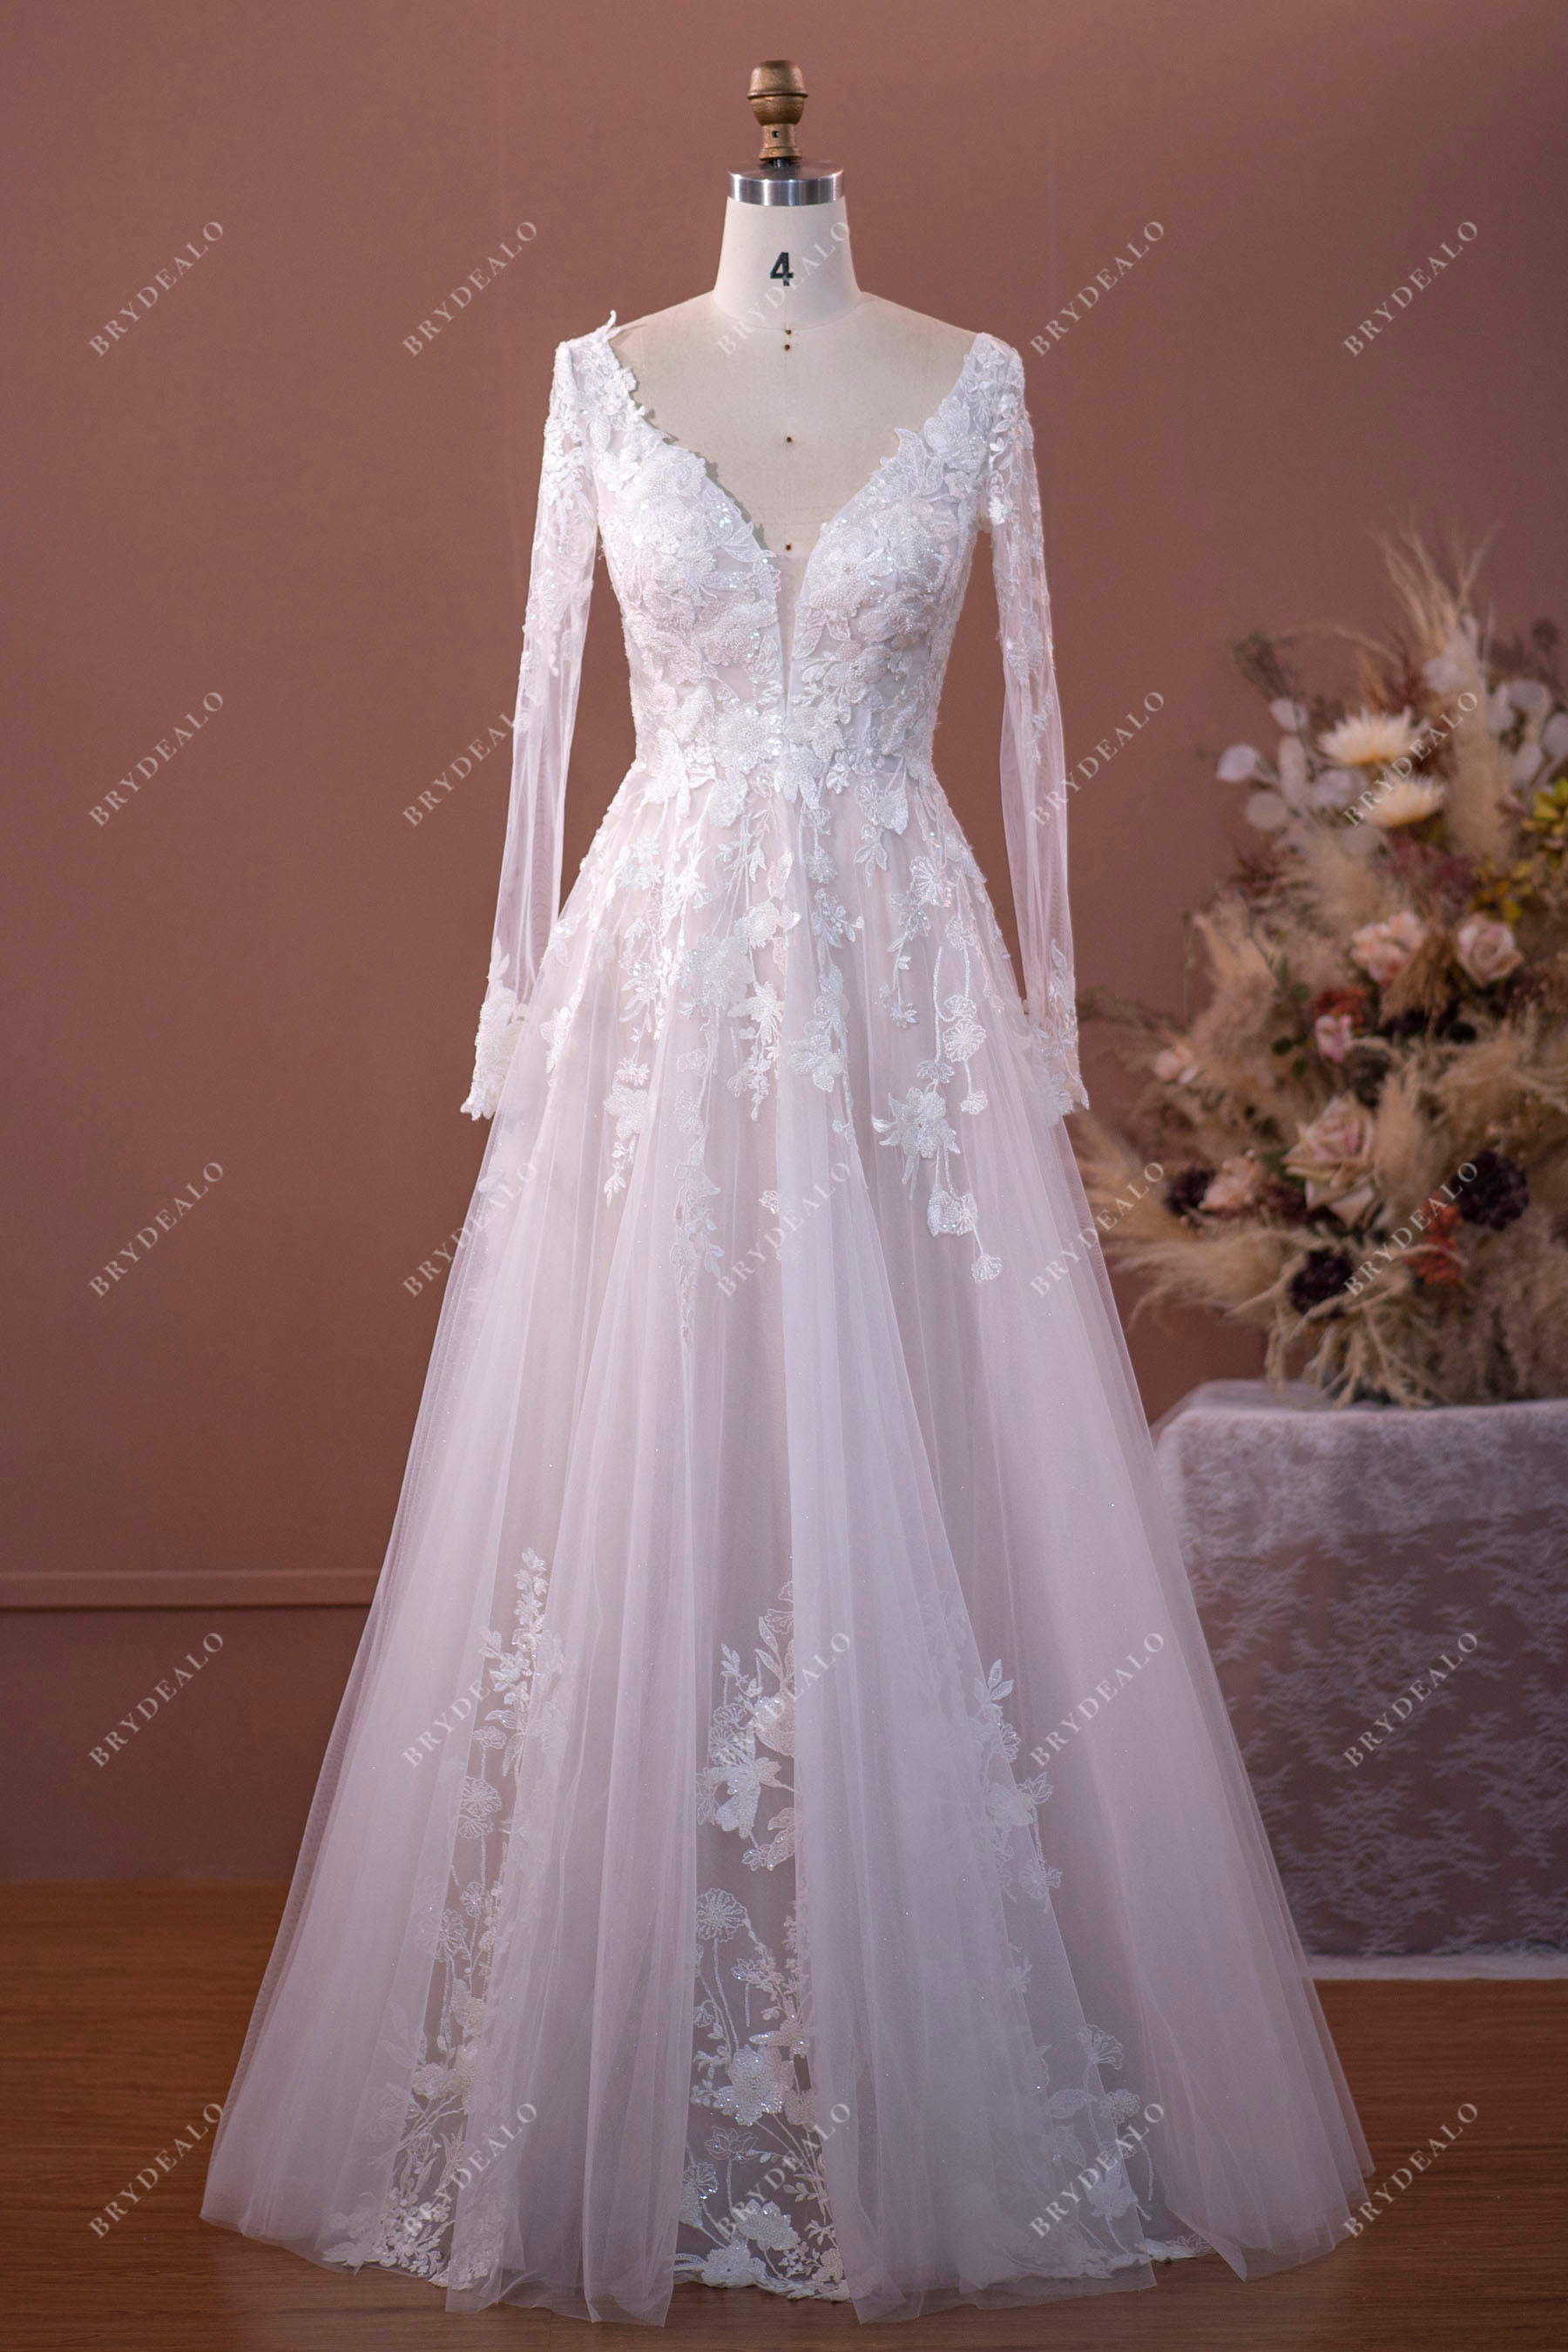 shimmery lace applique tulle A-line wedding dress 